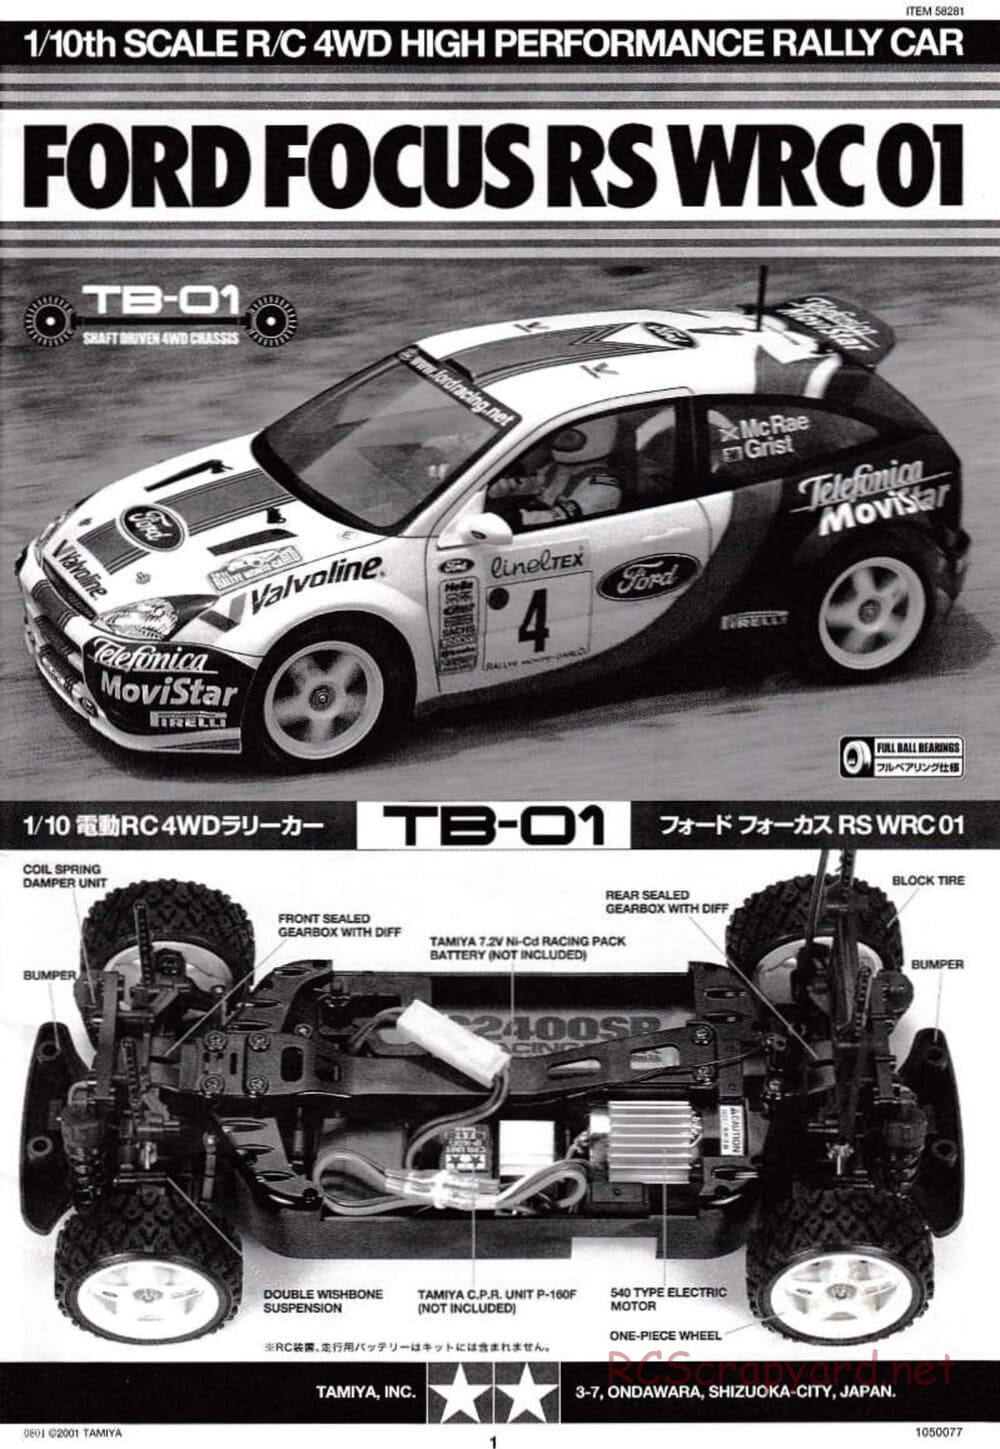 Tamiya - Ford Focus RS WRC 01 - TB-01 Chassis - Manual - Page 1